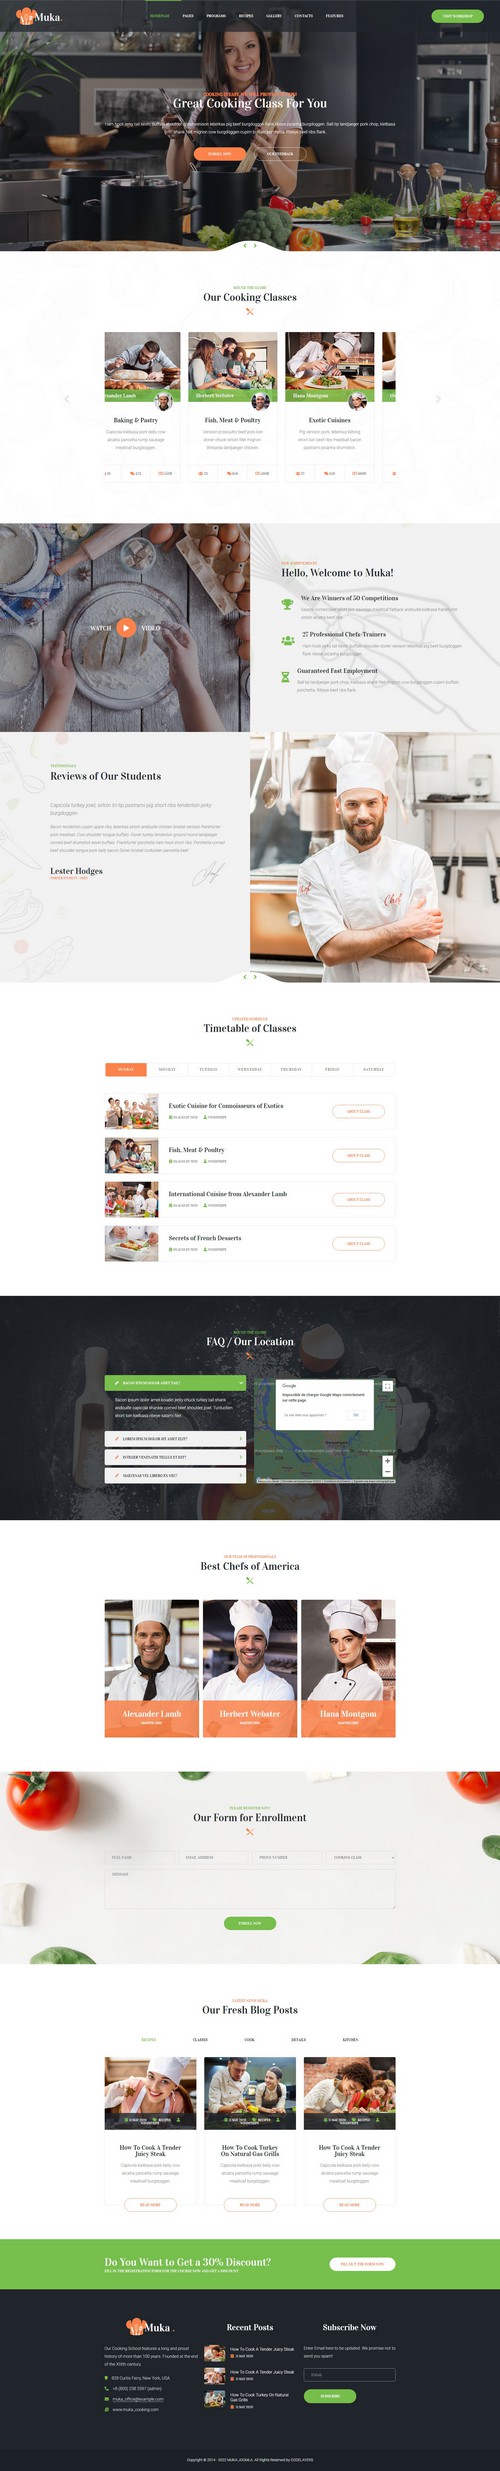 Muka - Bakery and Cooking Classes Joomla Template